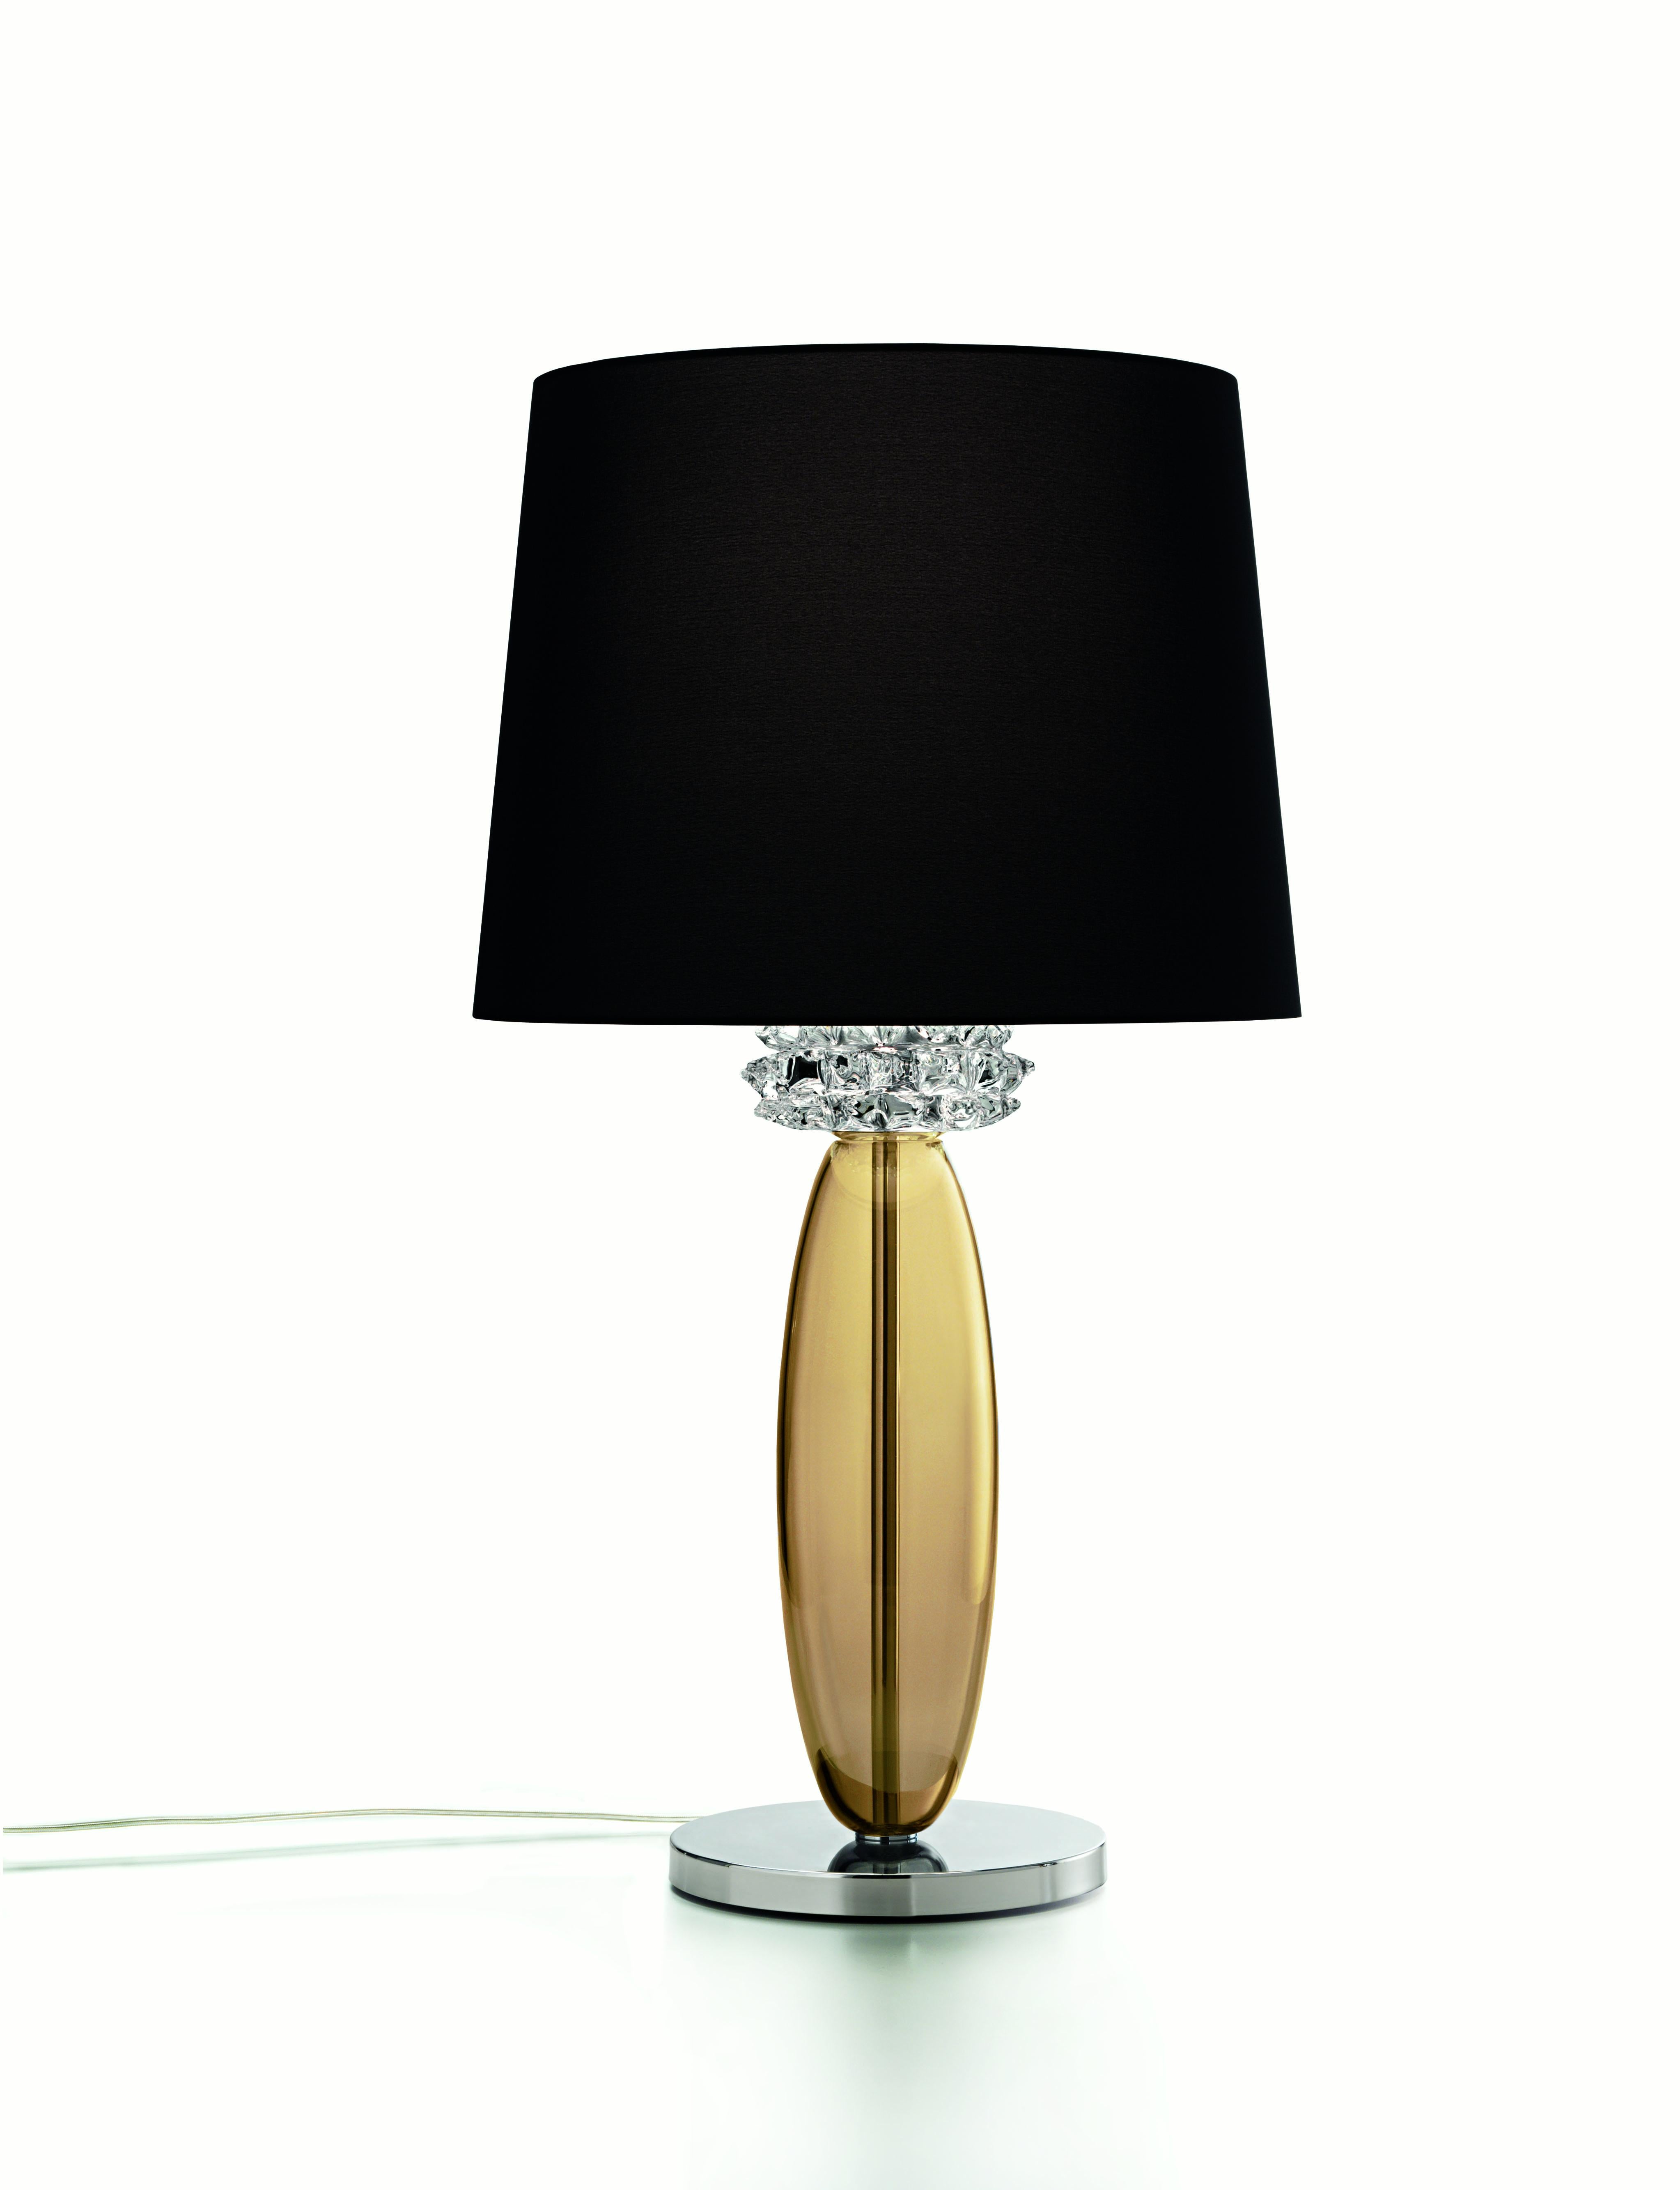 Orange (Caramel_CA) Rotterdam 5565 Table Lamp in Glass with Black Shade, by Barovier&Toso 2